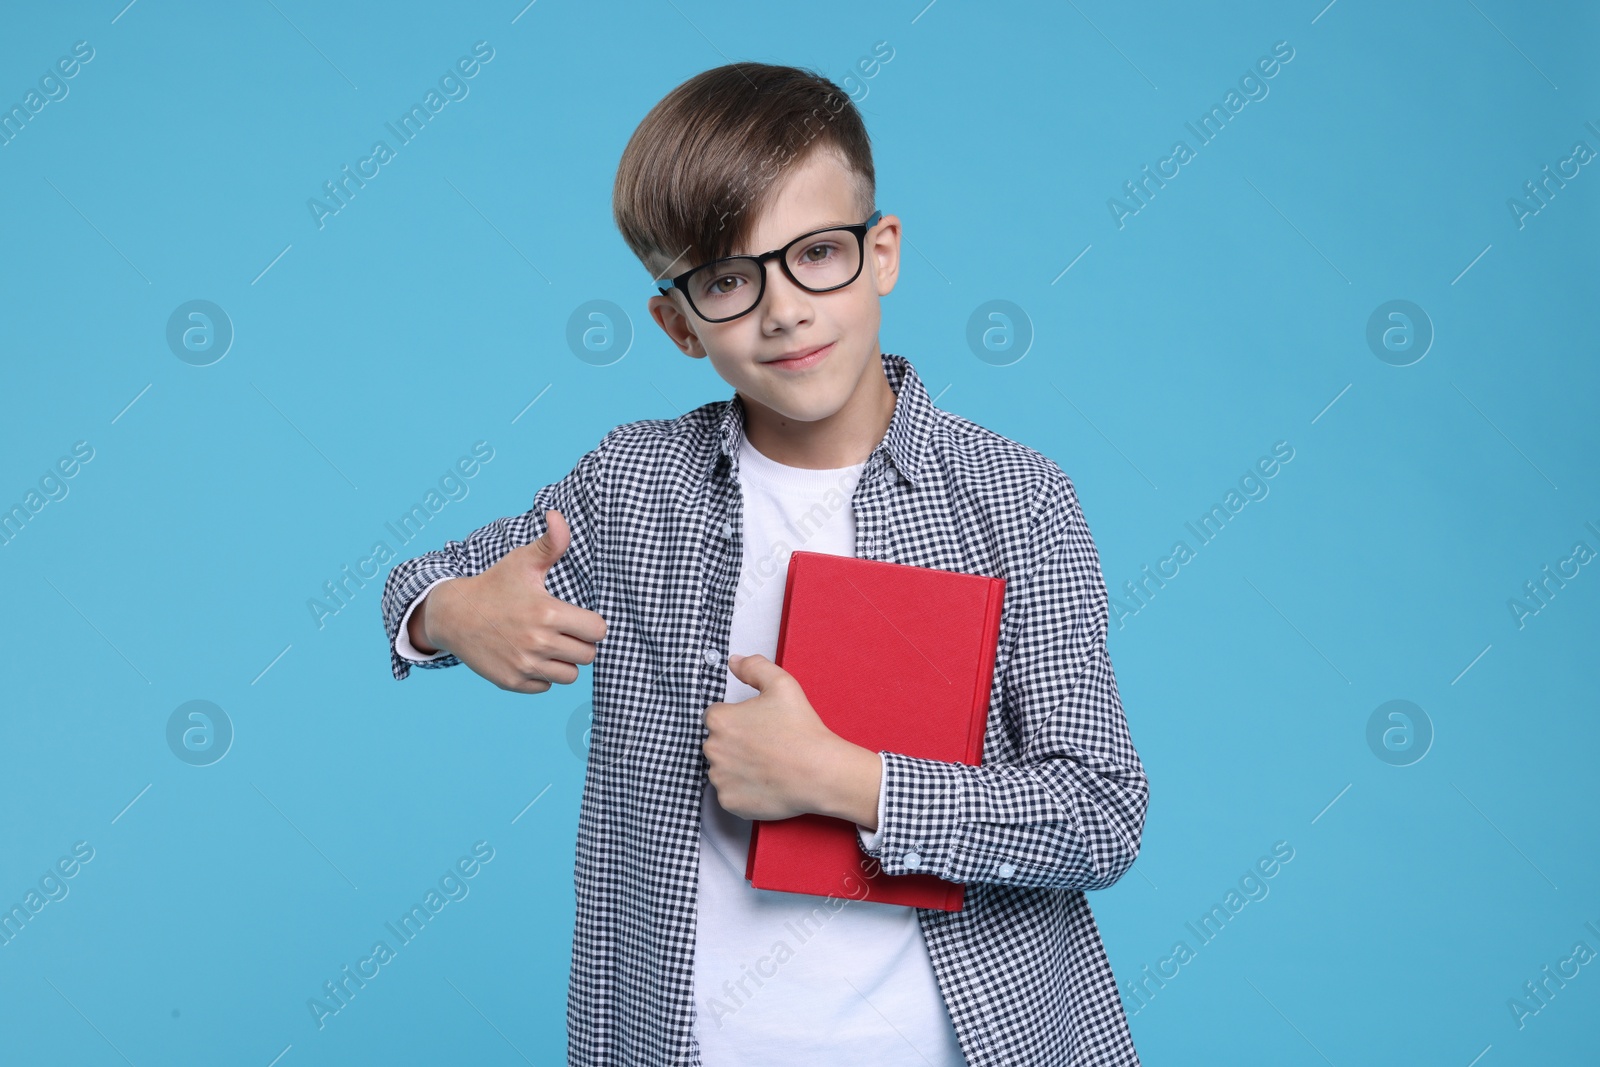 Photo of Cute schoolboy in glasses with book showing thumbs up on light blue background